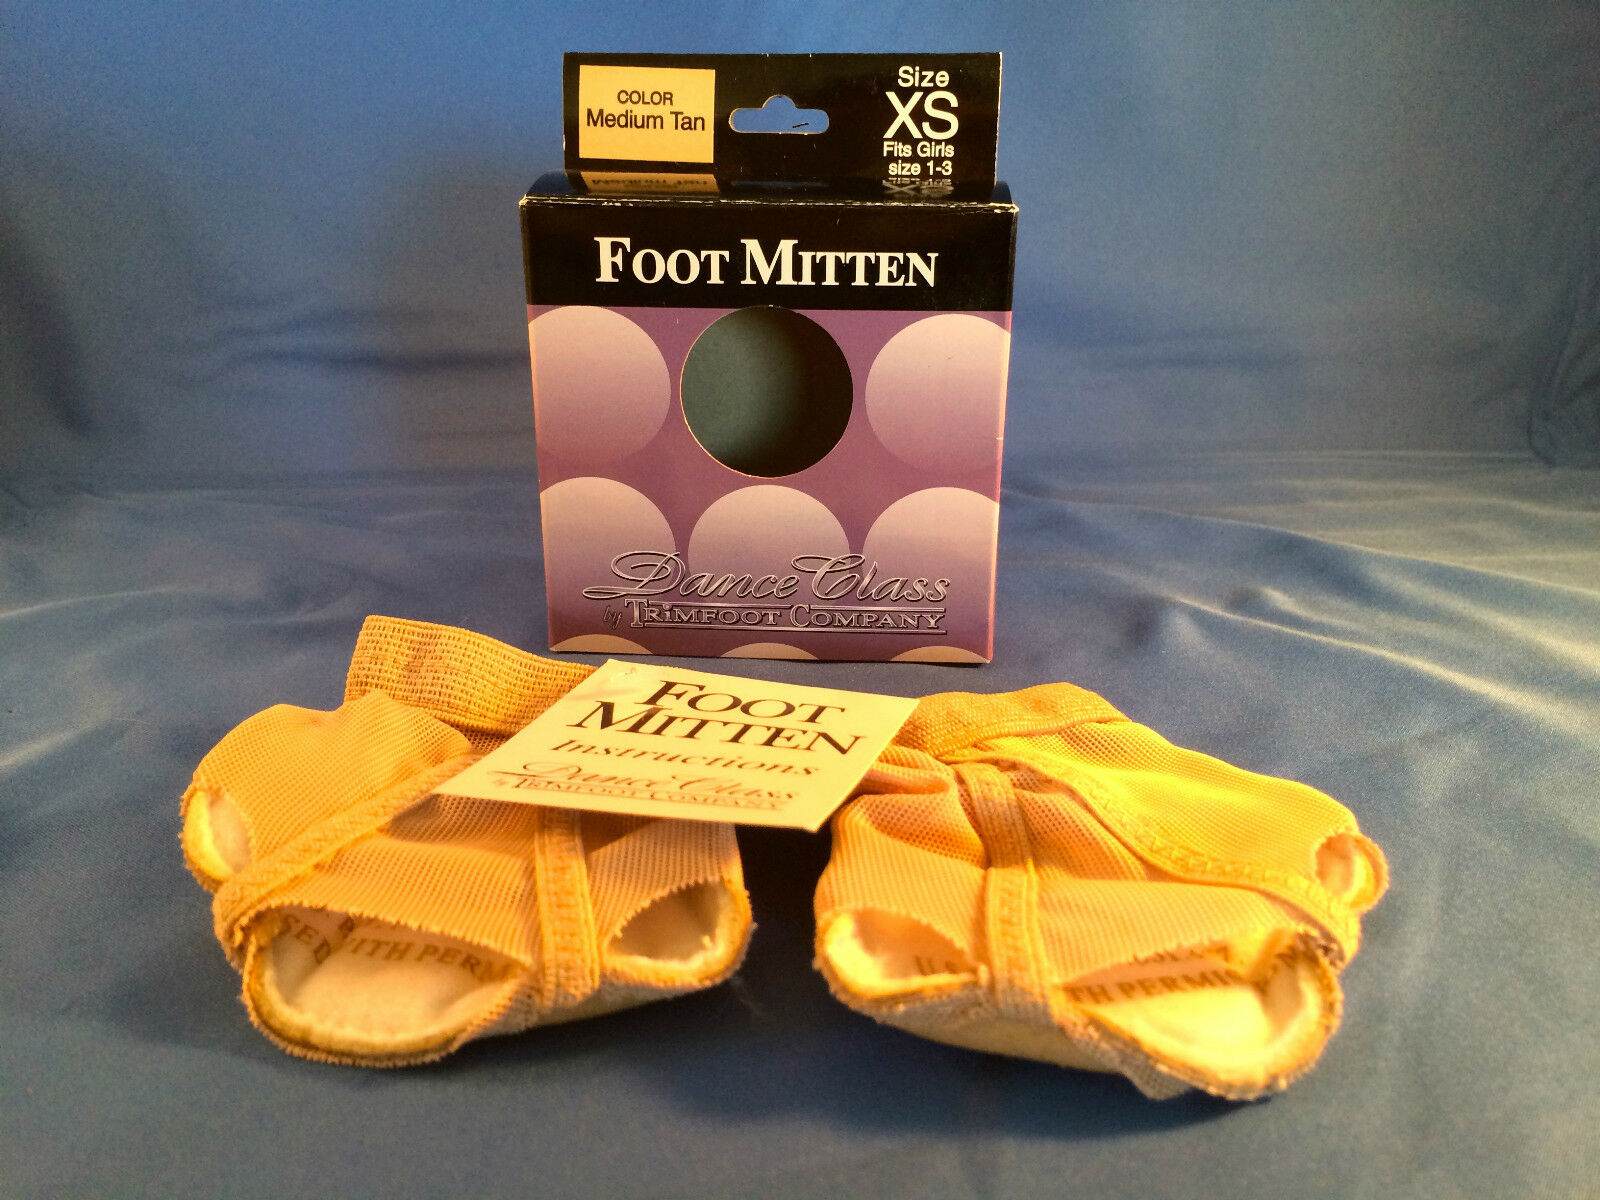 Trimfoot Company Foot Mittens